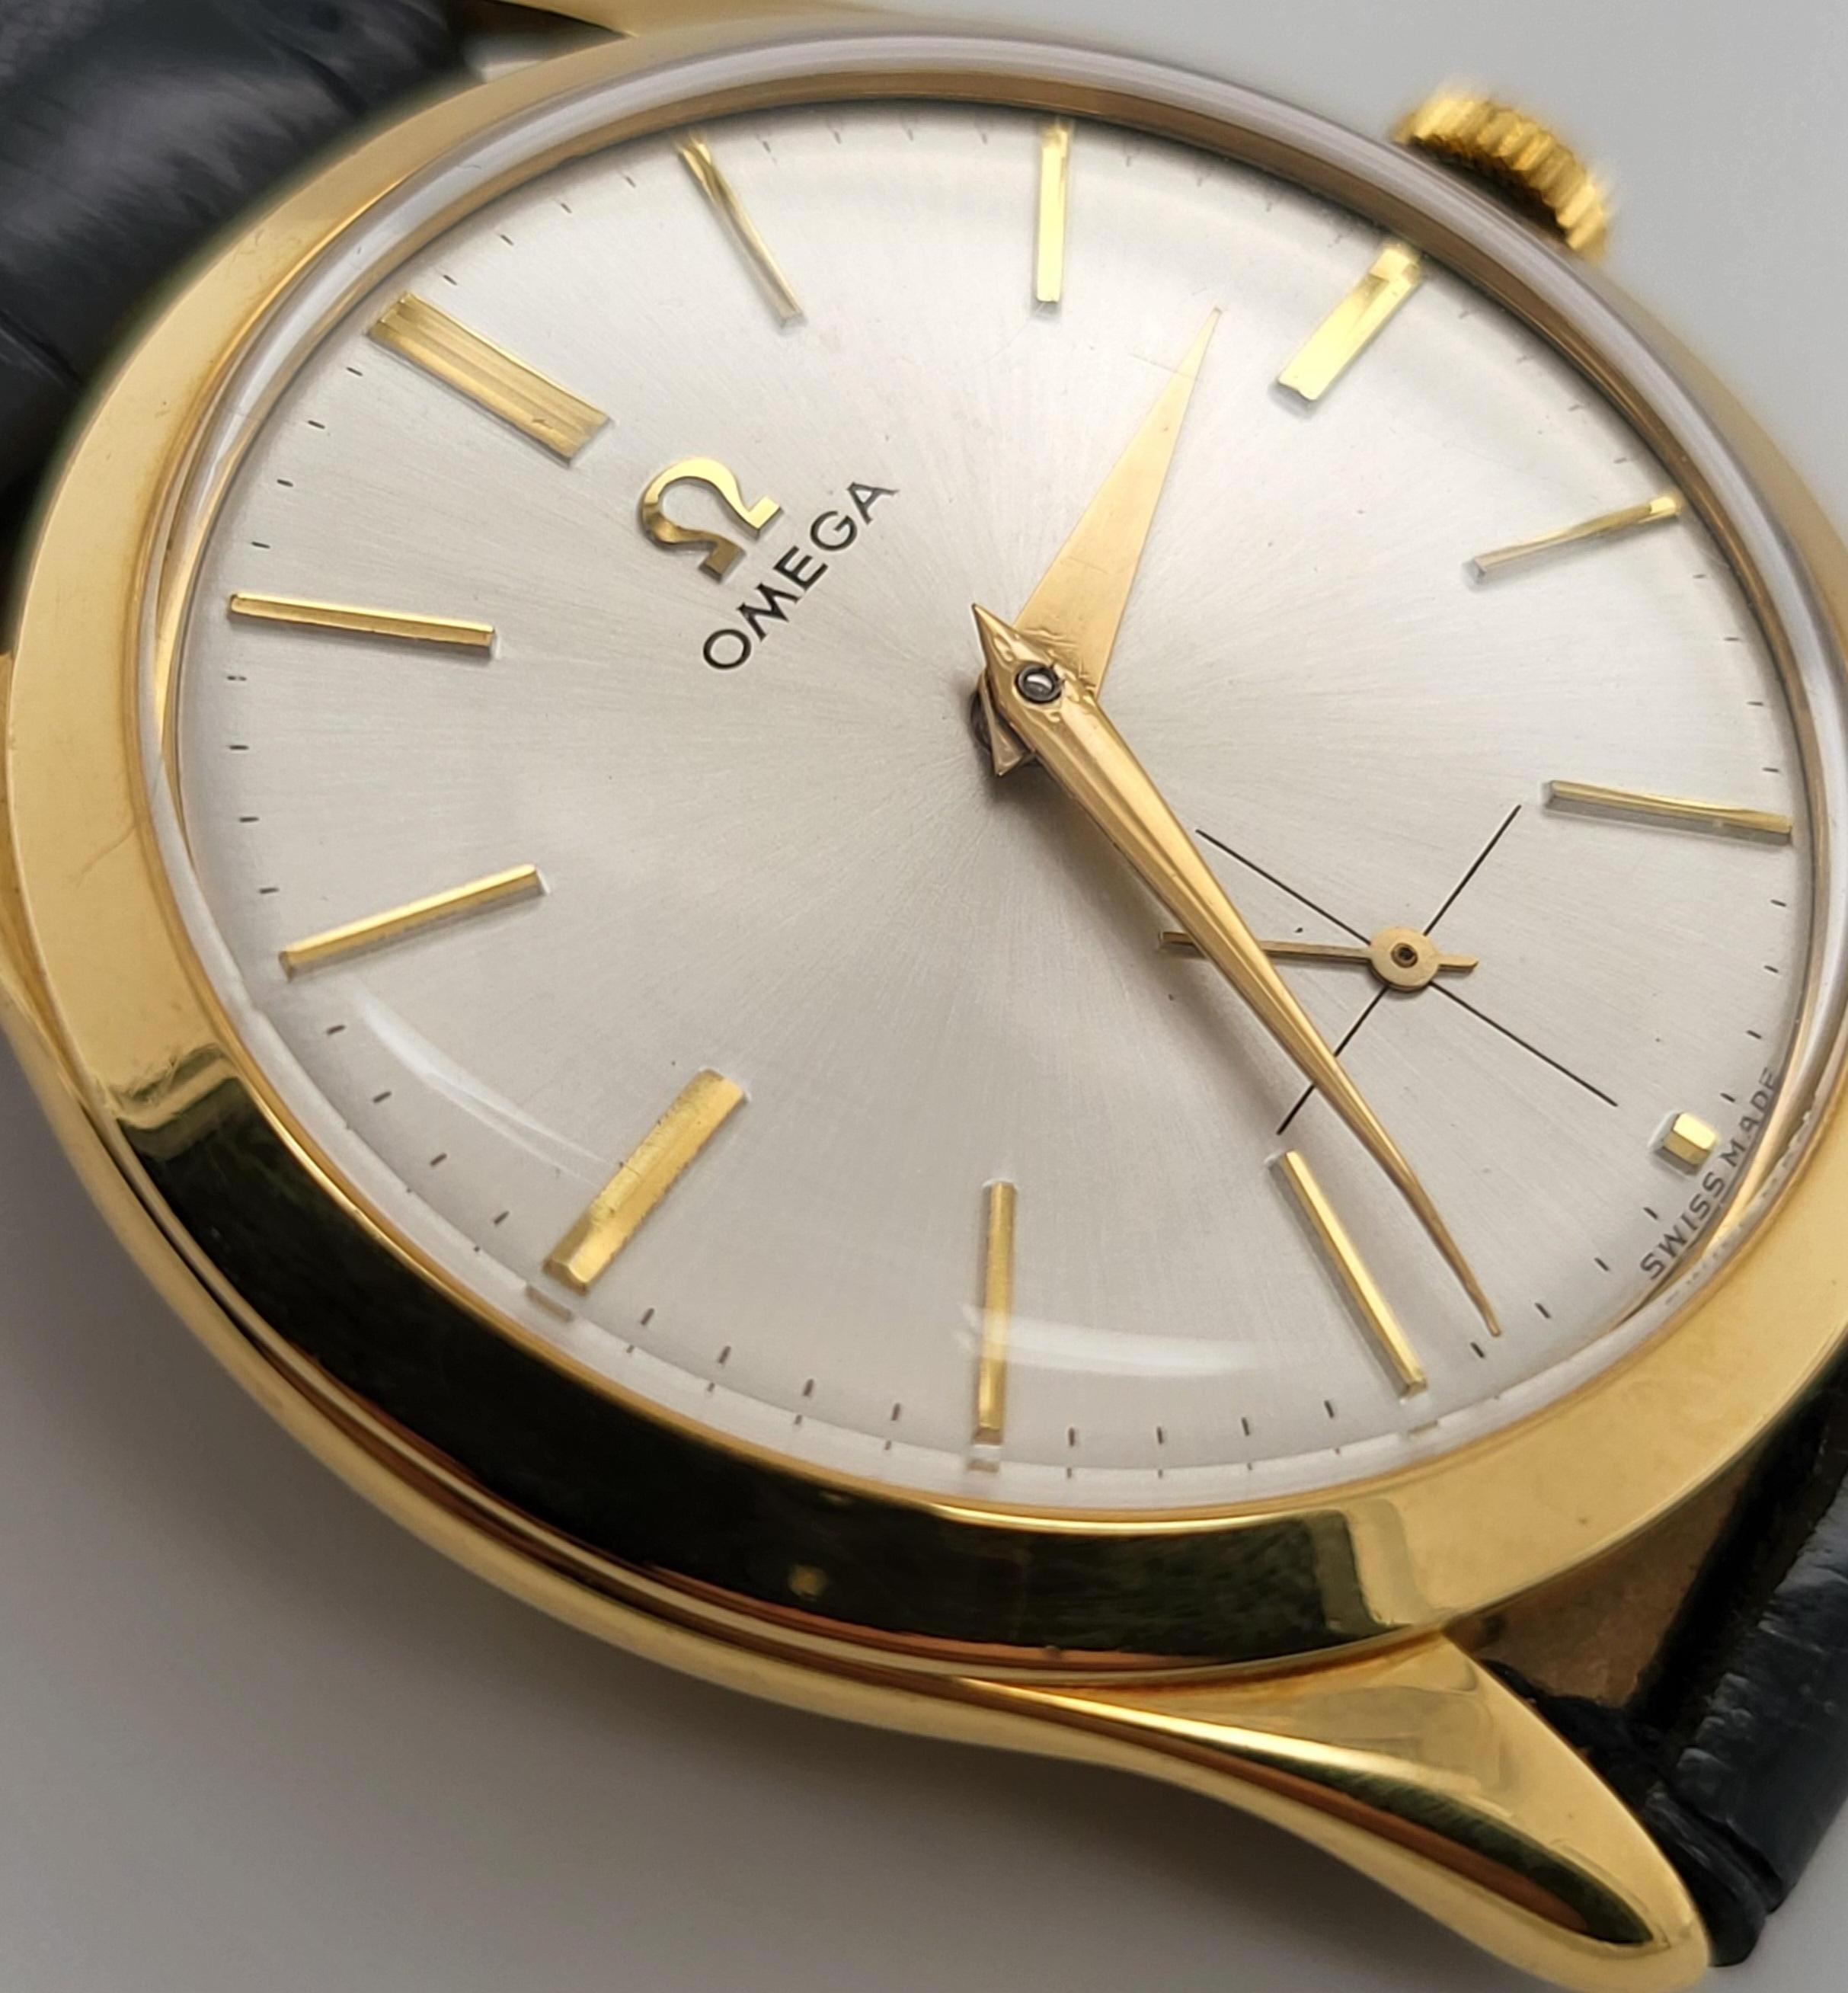 Artisan In Perfect Condition 18kt Yellow Gold Omega Reference 2619, Mechanical Movement